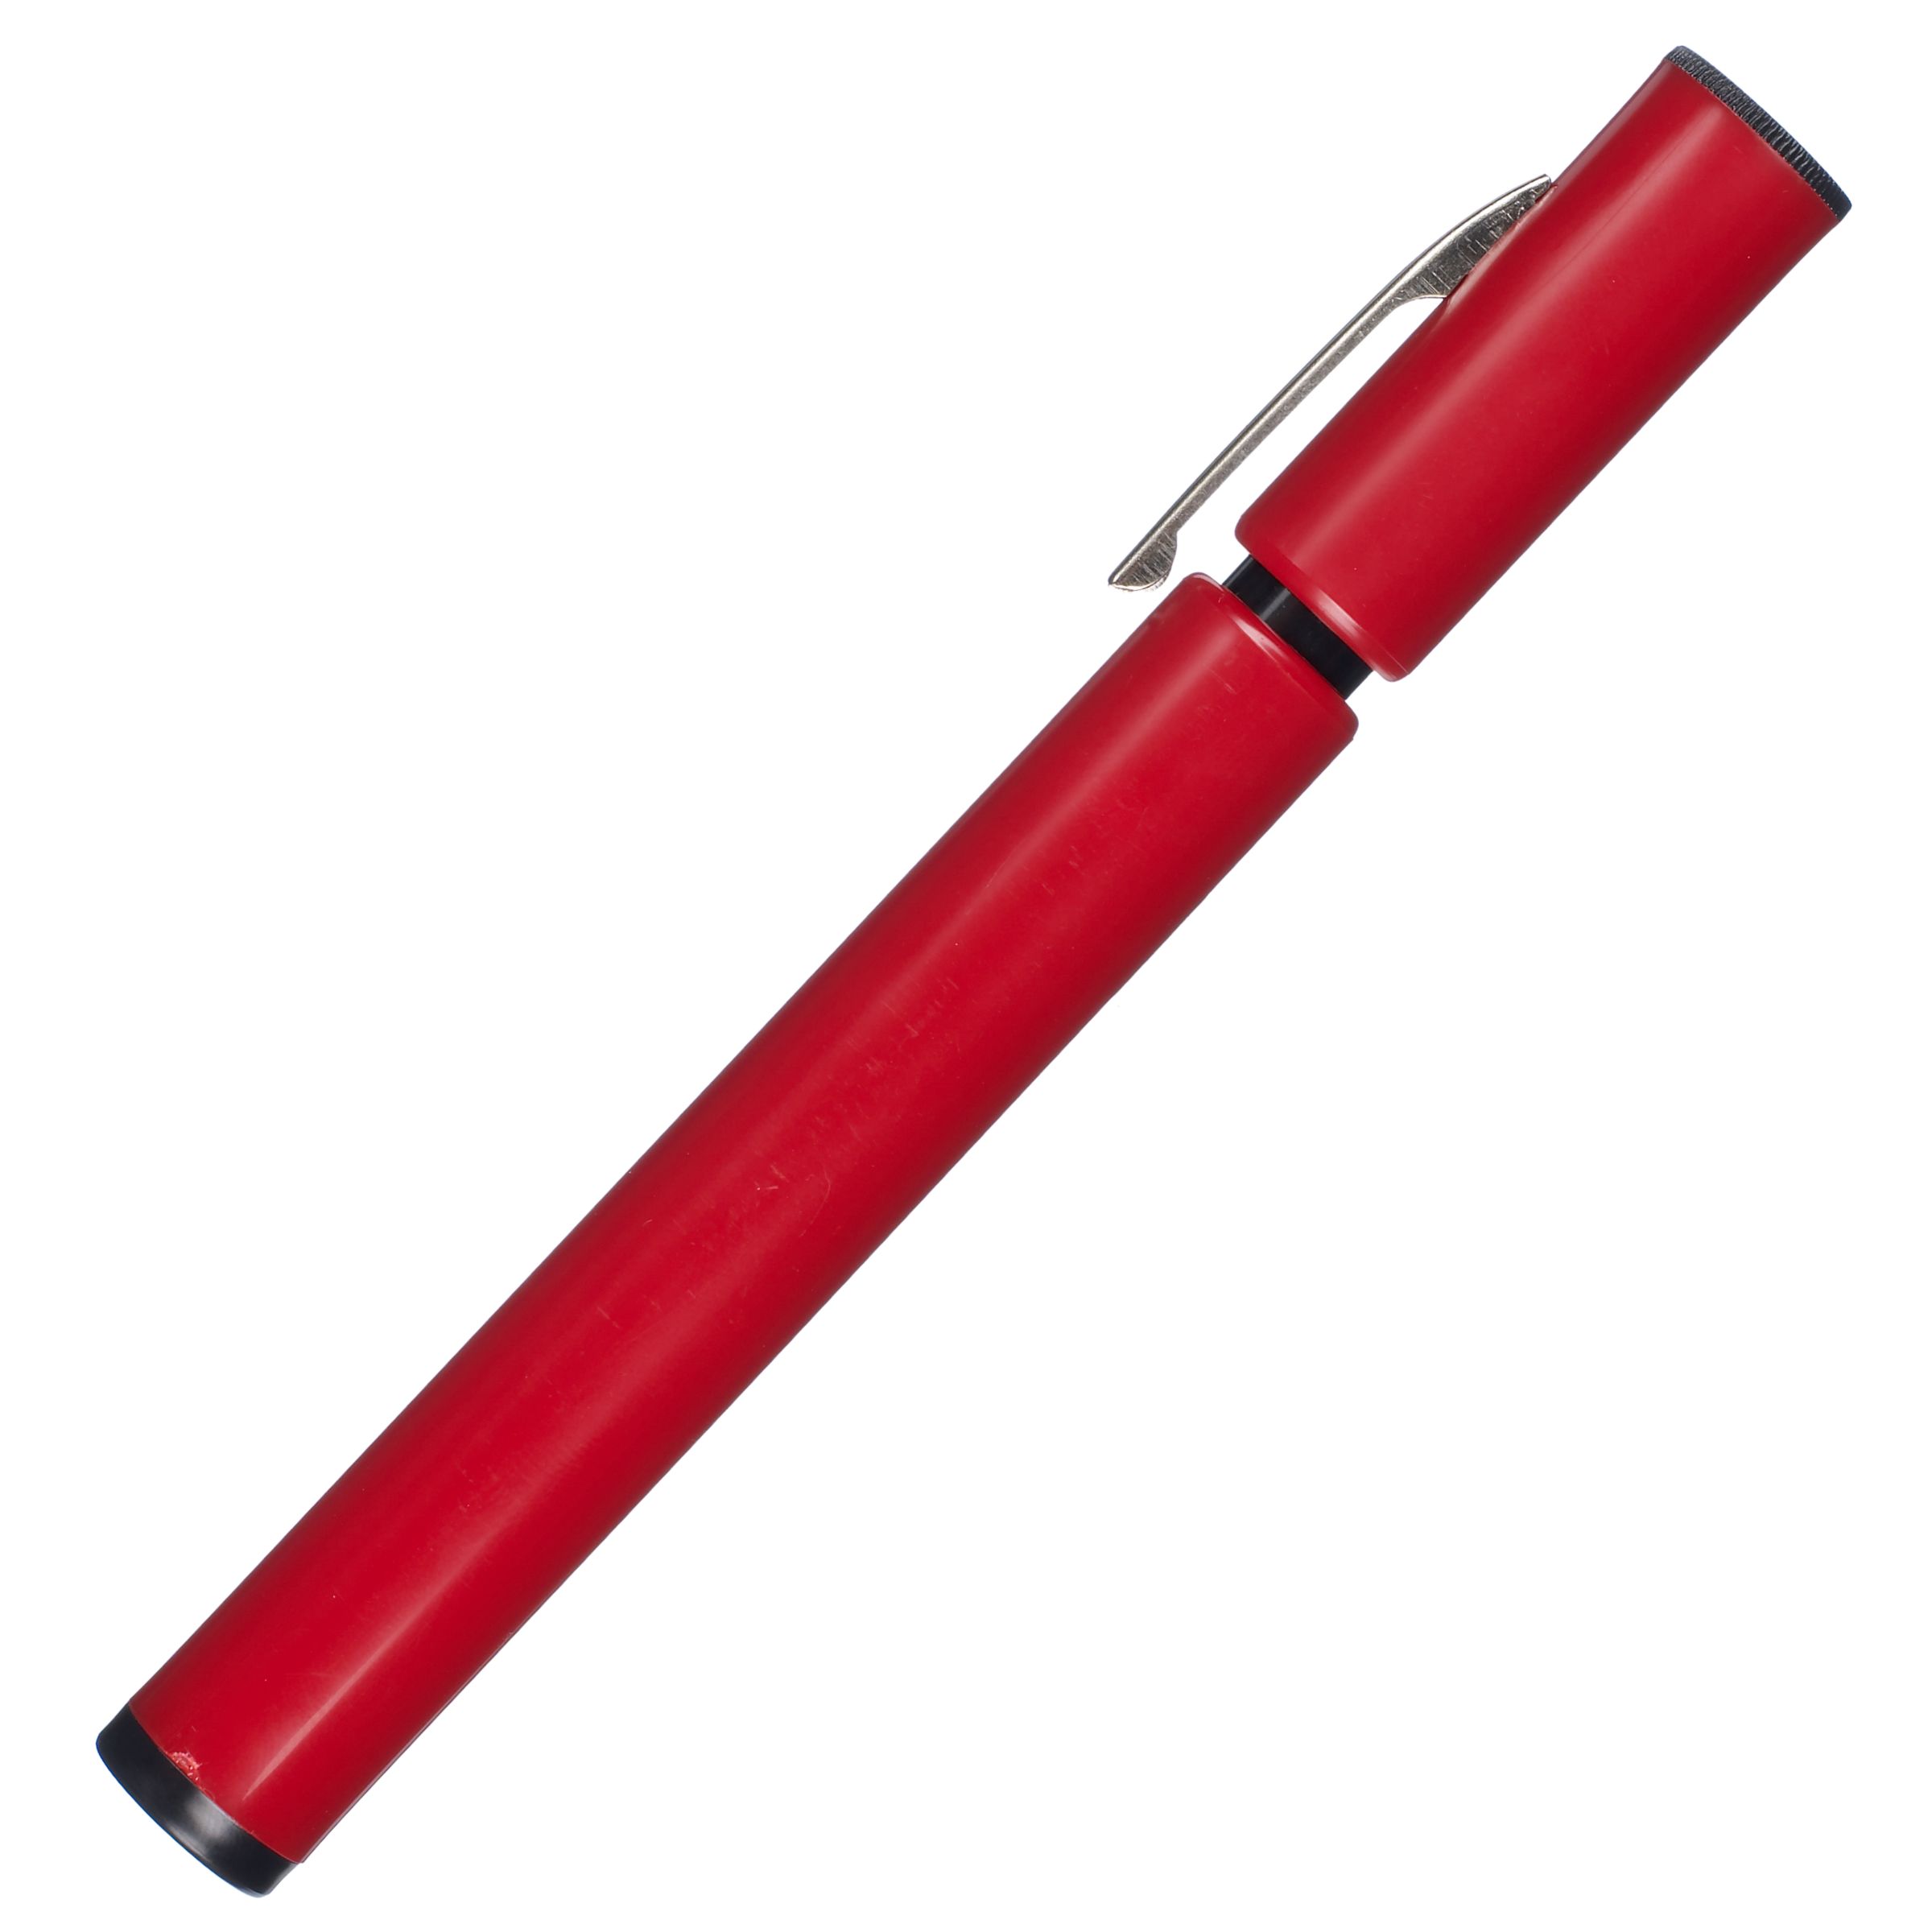 Pocket Telescope and Microscope, Red